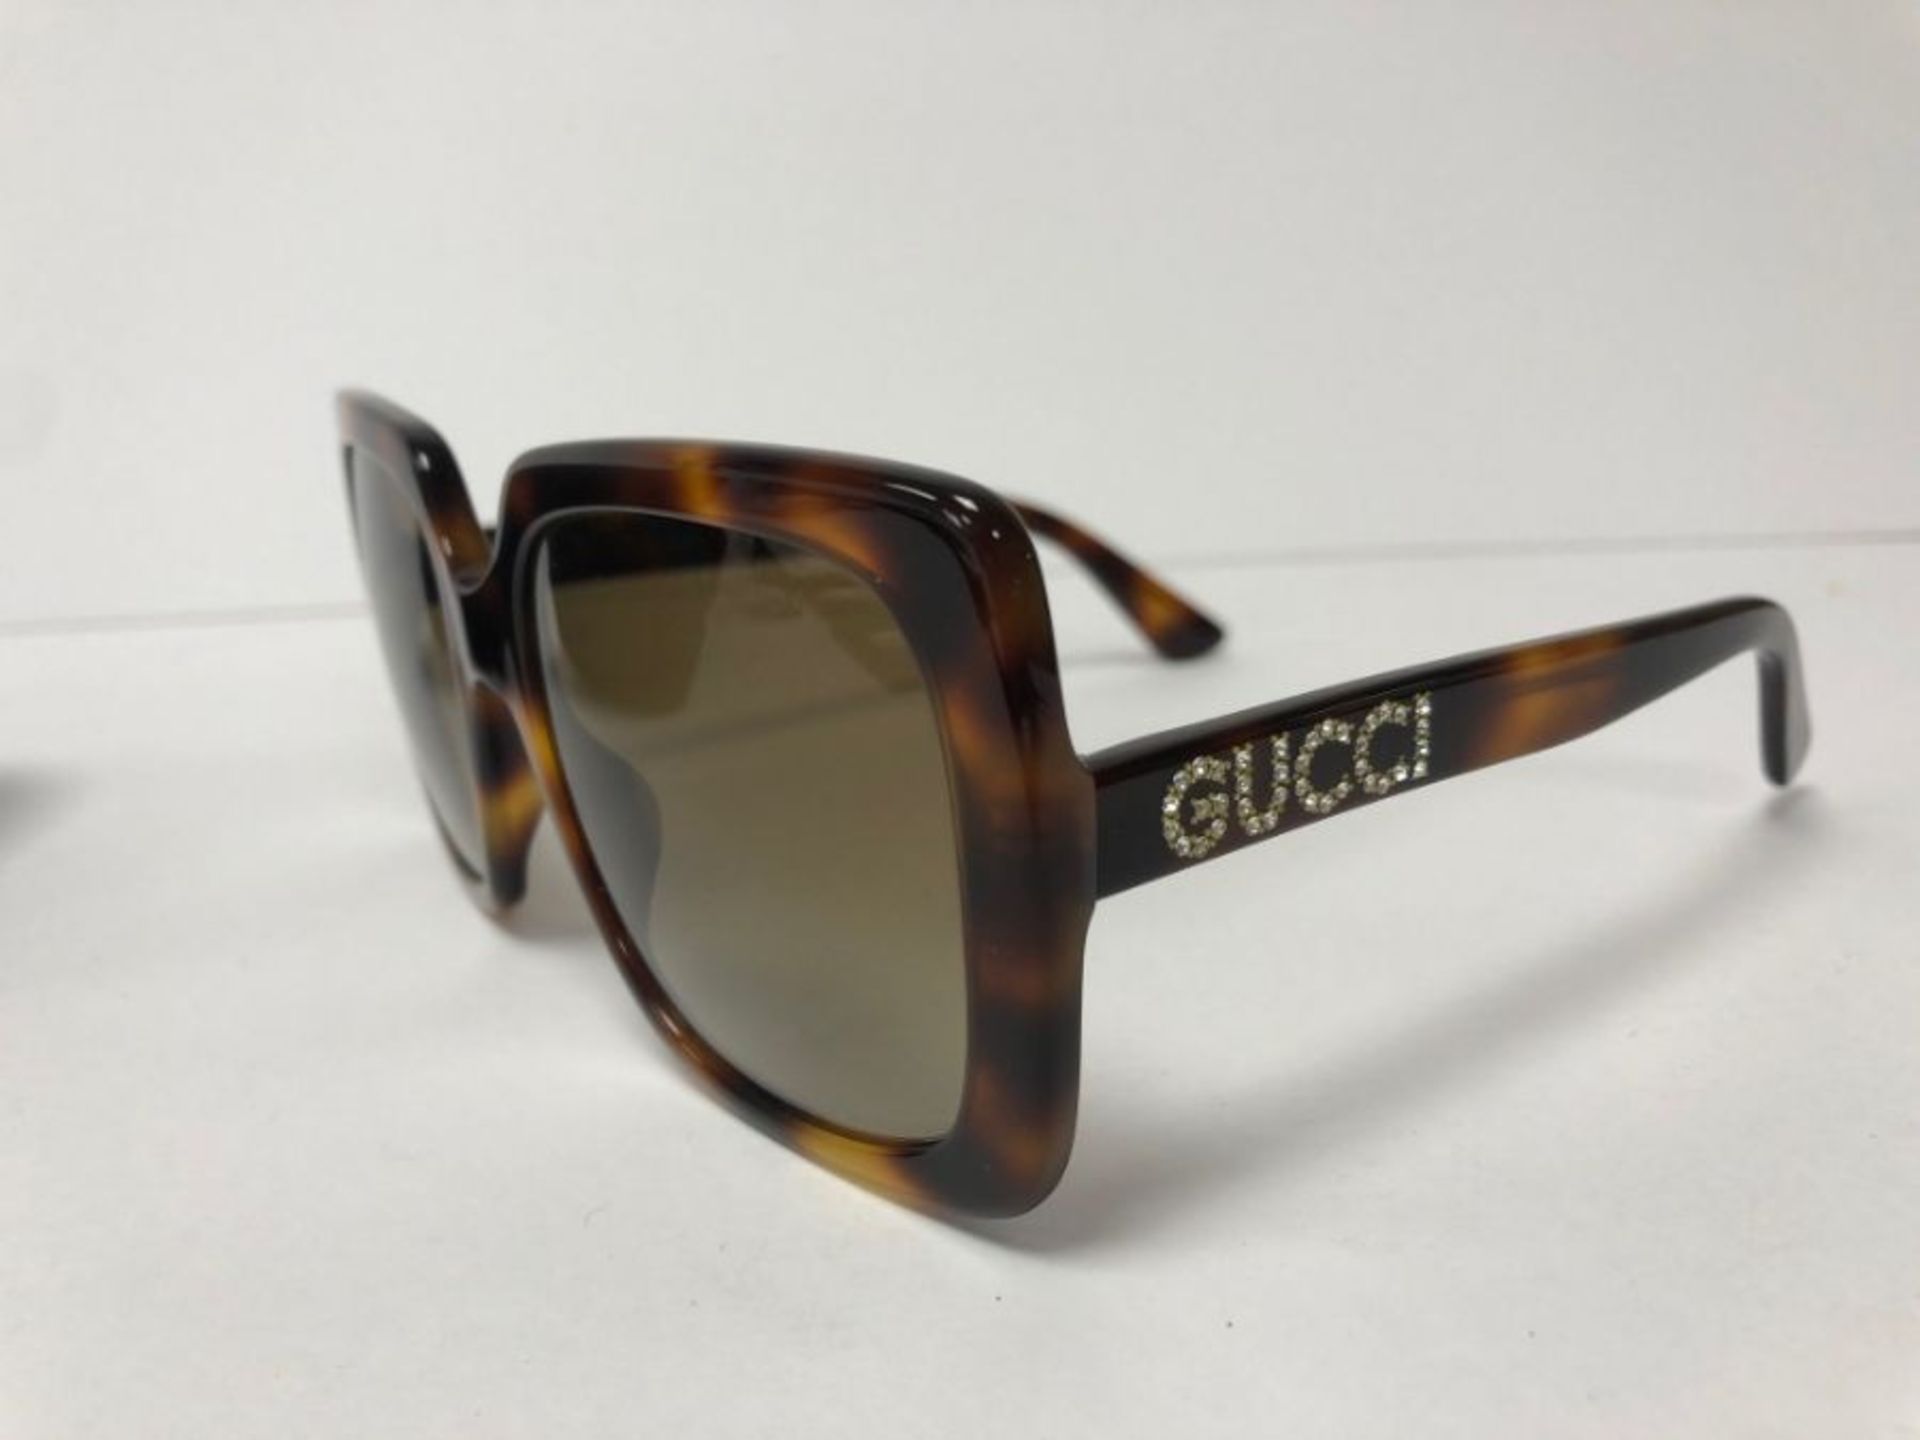 Gucci Men's Sunglasses, Mens, GG0689S Tortoise Shell with case - Image 4 of 7